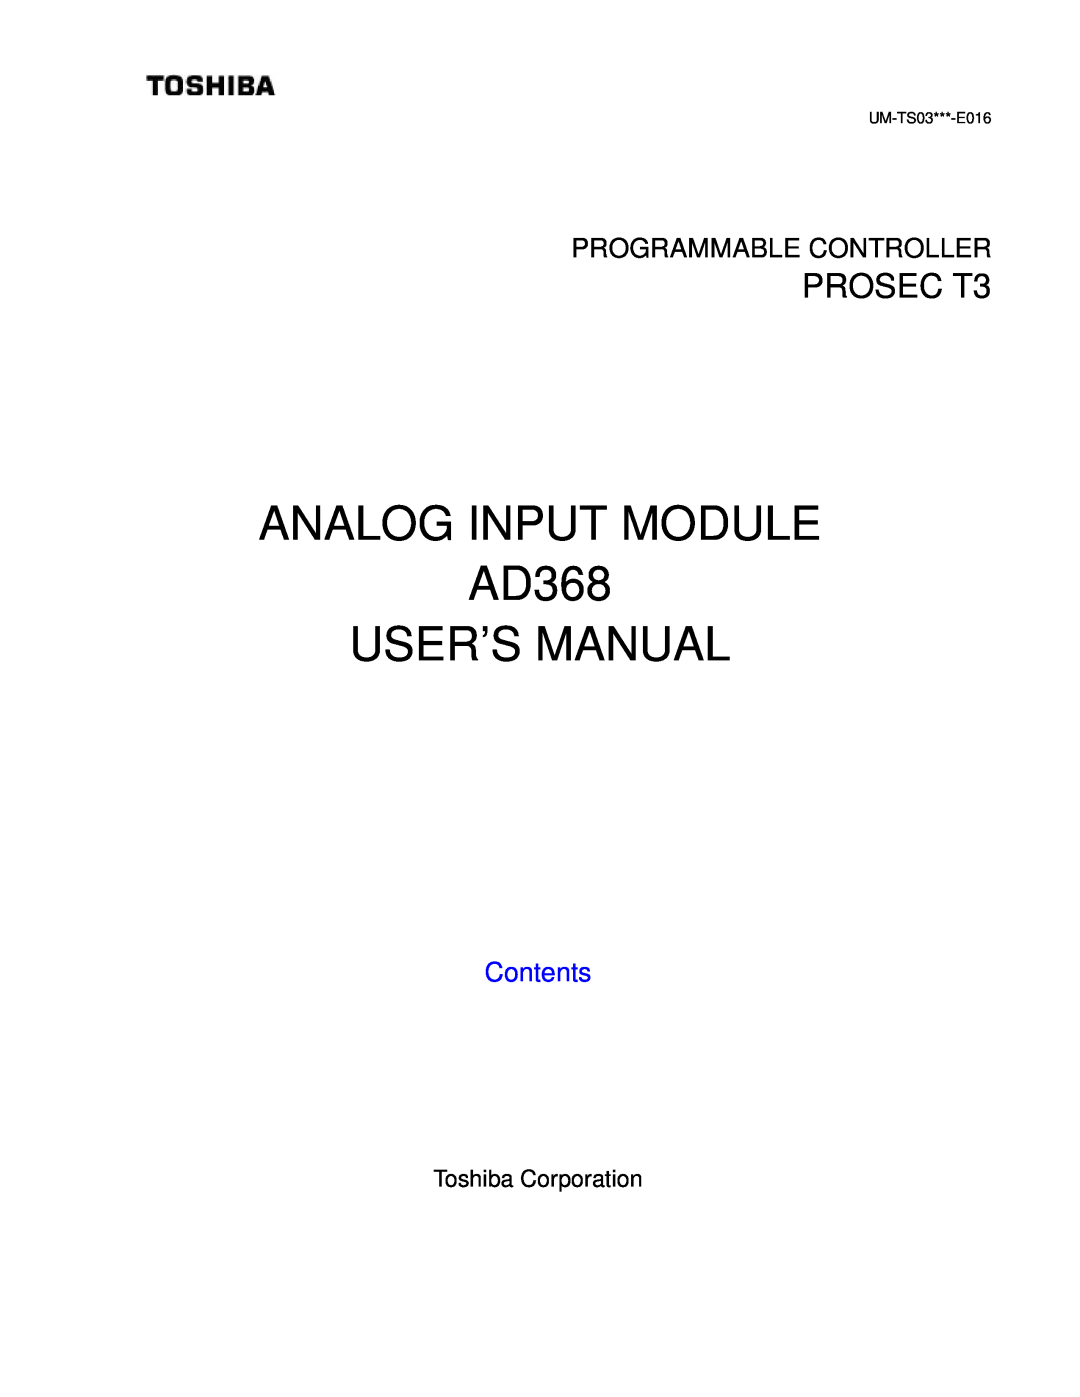 Toshiba user manual ANALOG INPUT MODULE AD368 USER’S MANUAL, PROSEC T3, Programmable Controller, Contents 